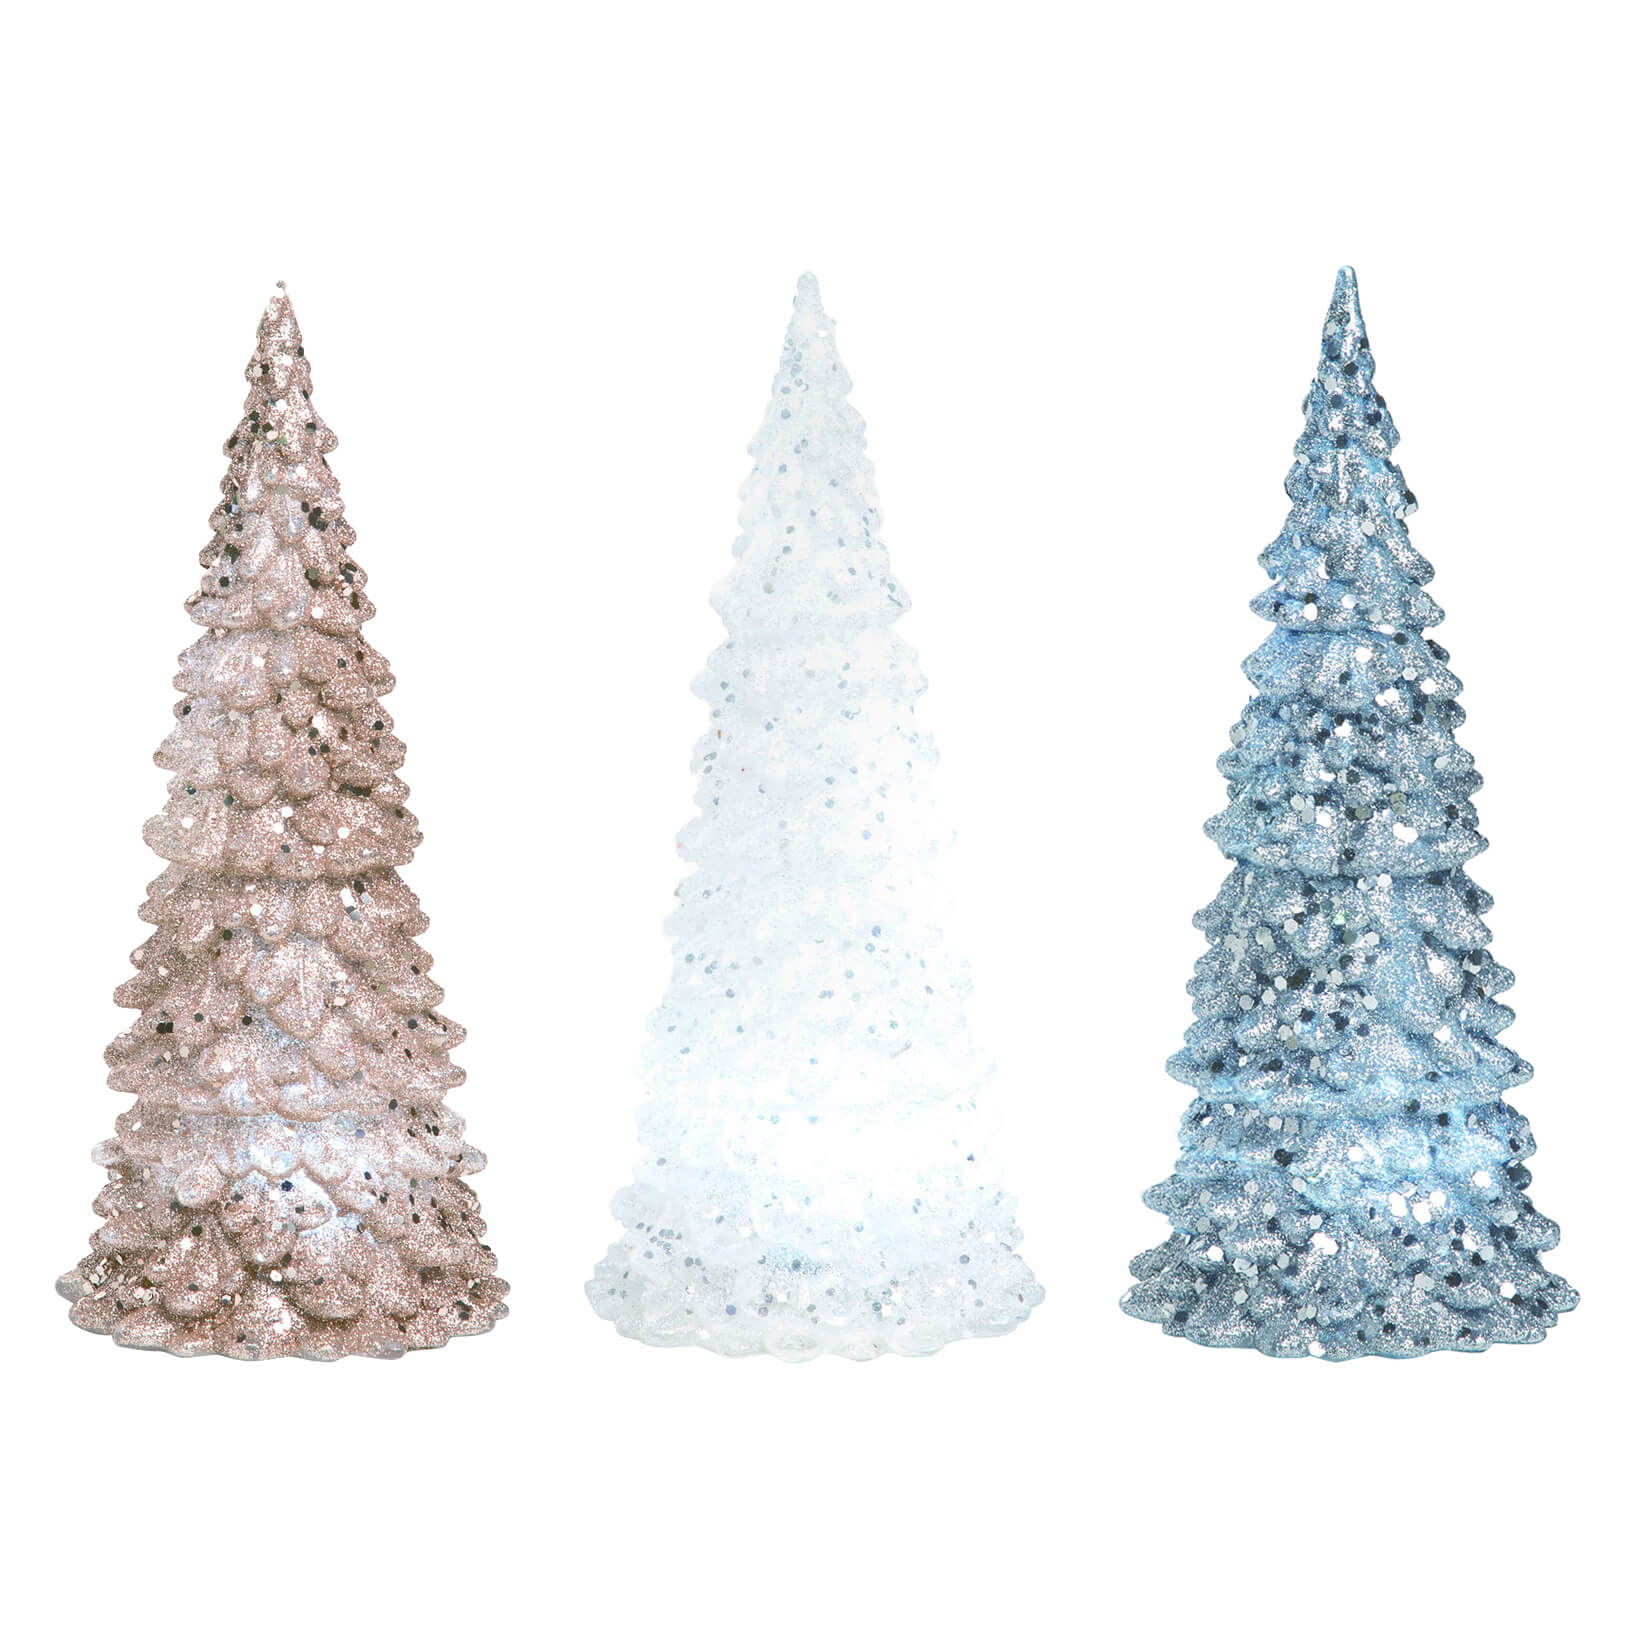 White, Silver & Copper Light Up Christmas Trees Set/3